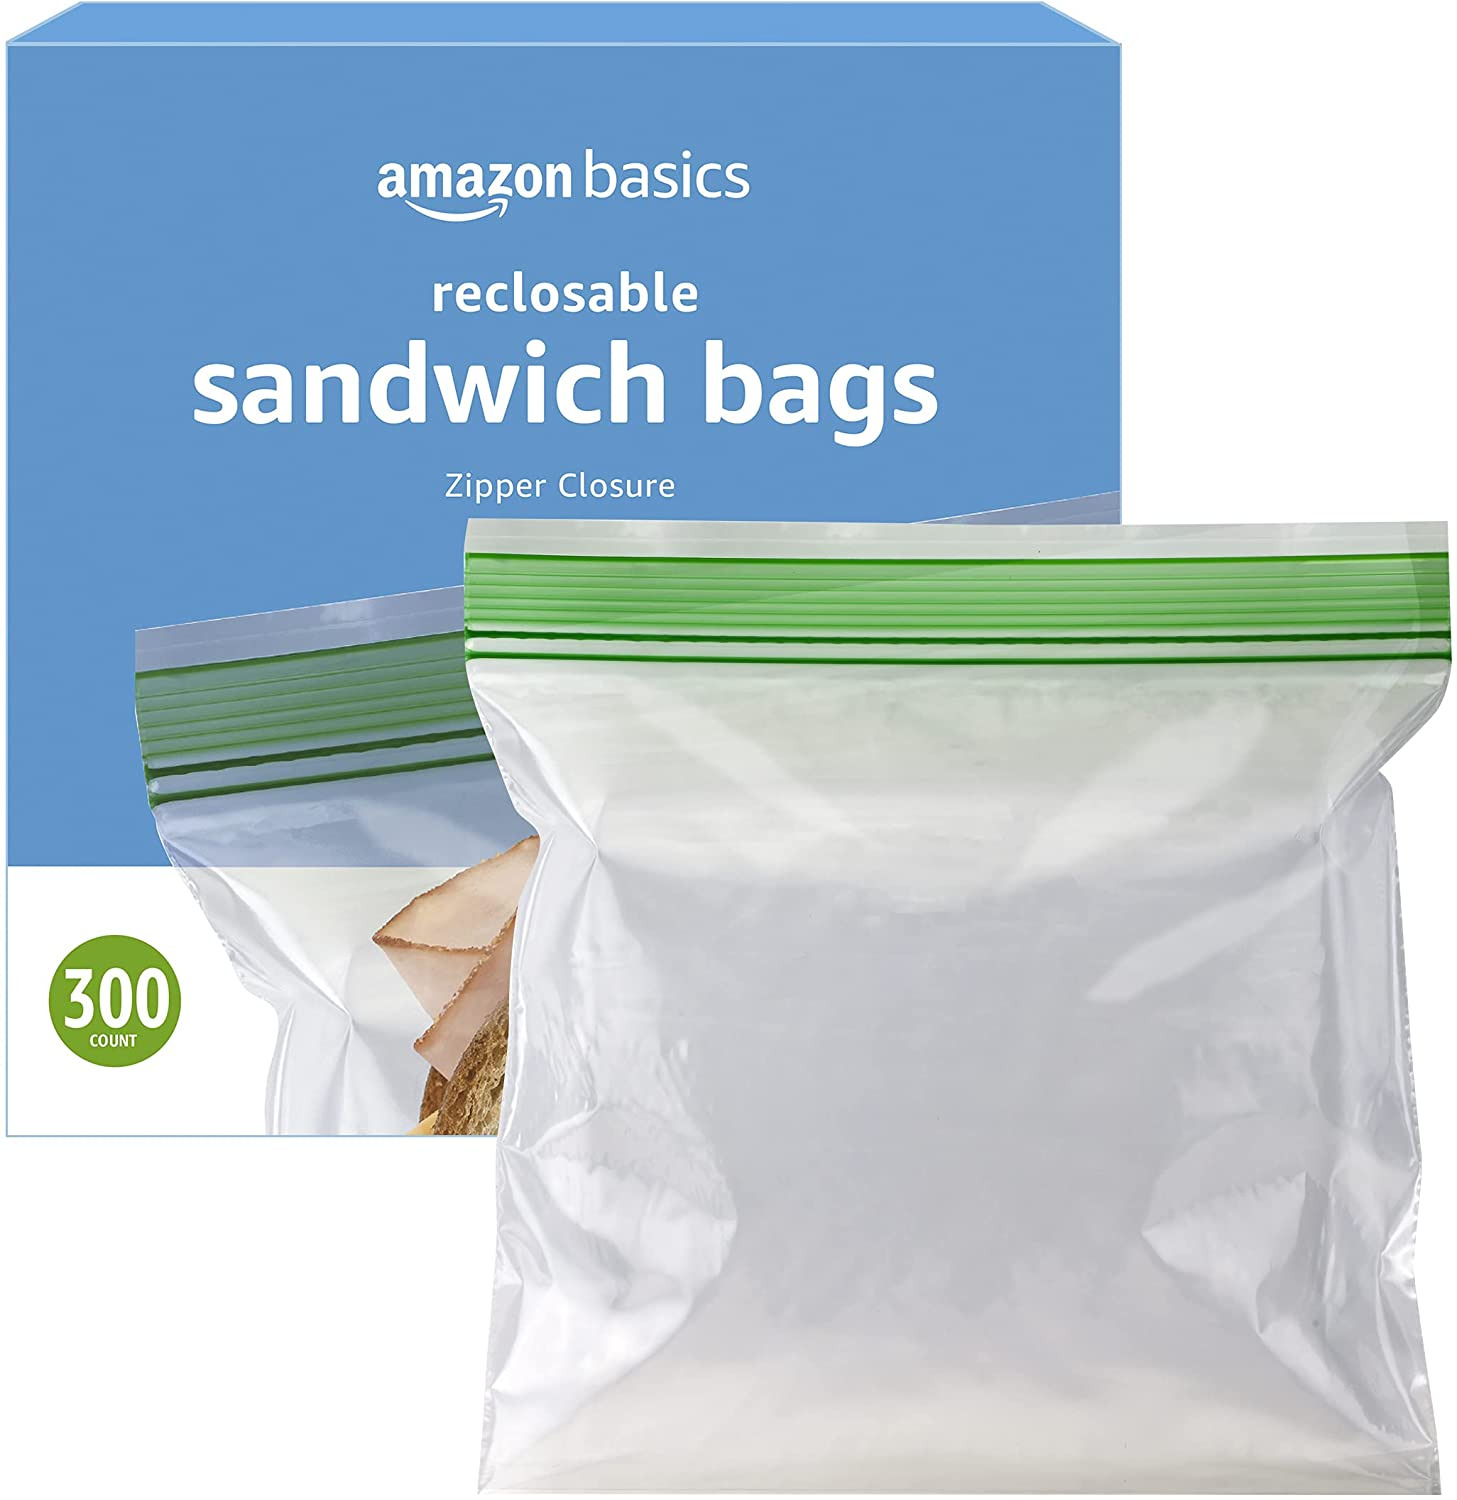 Sandwich Storage Bags, 300 Count (Previously Solimo)